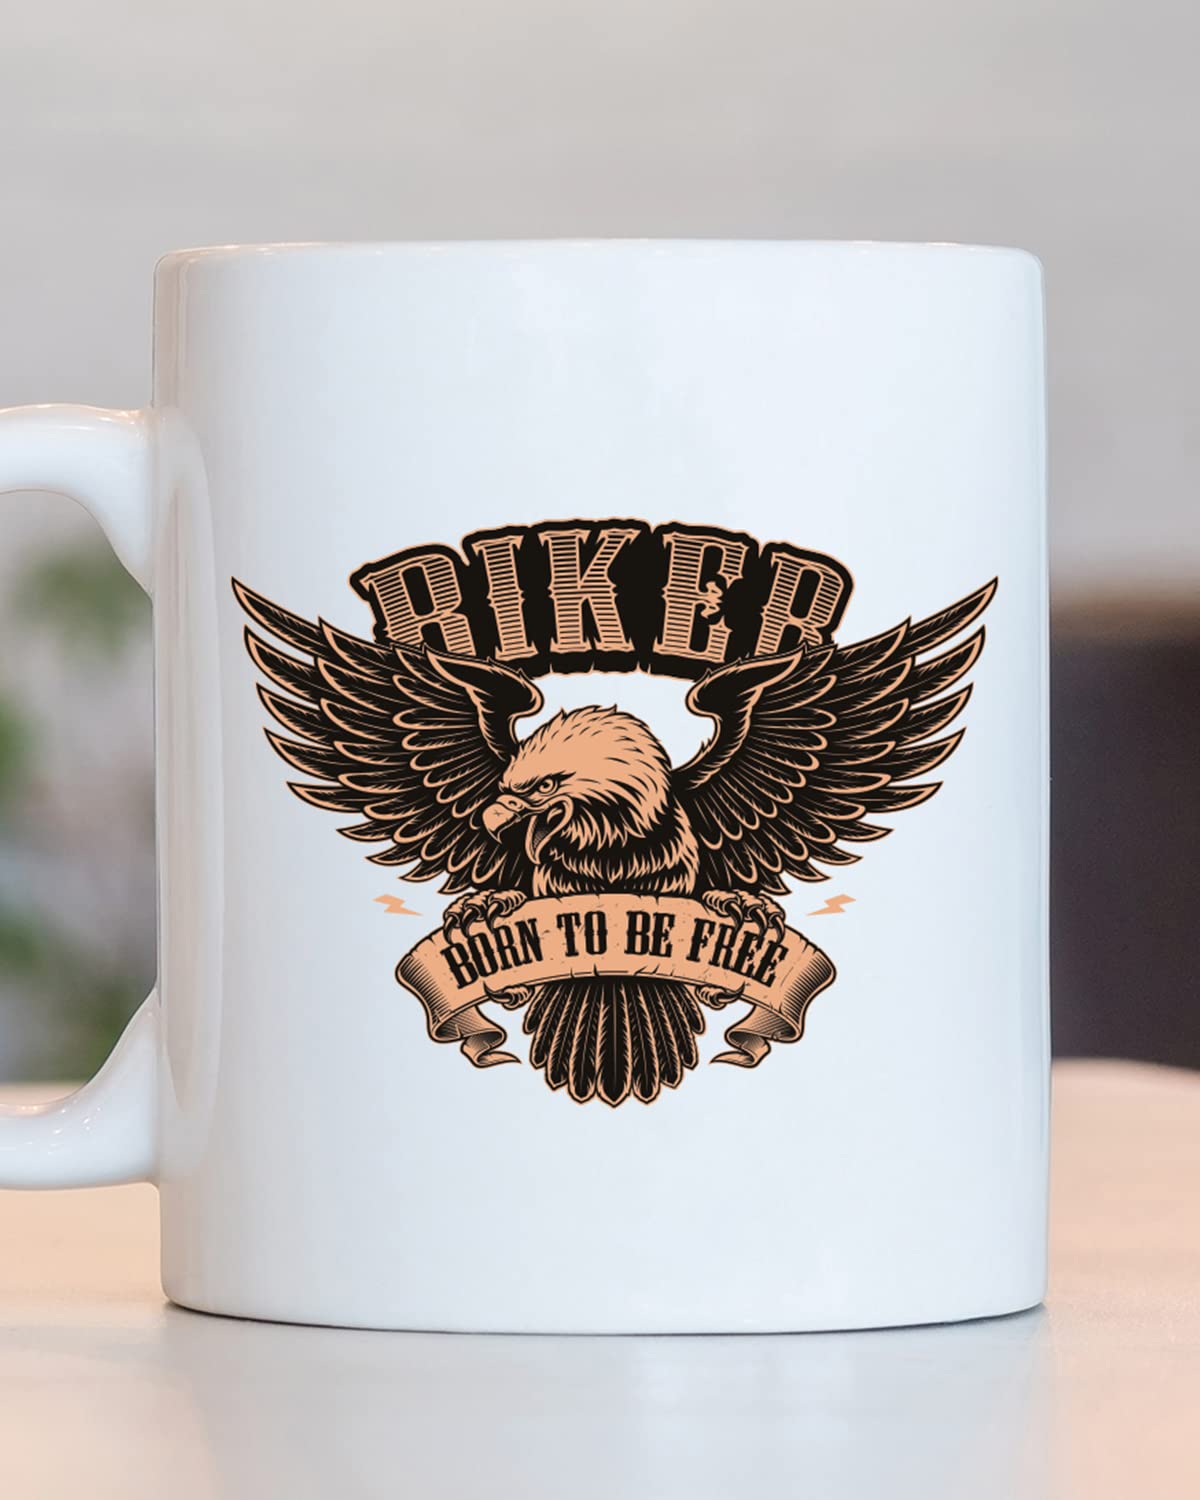 BIKER BORN TO BE FREE Coffee Mug - Unique Gifts For Bikers, Motorcycle Personalized Mugs, Gifts For Motorcycle Lovers, Bike Quotes Mug for Husband Boyfriend Birthday, Valentine Mugs for Him